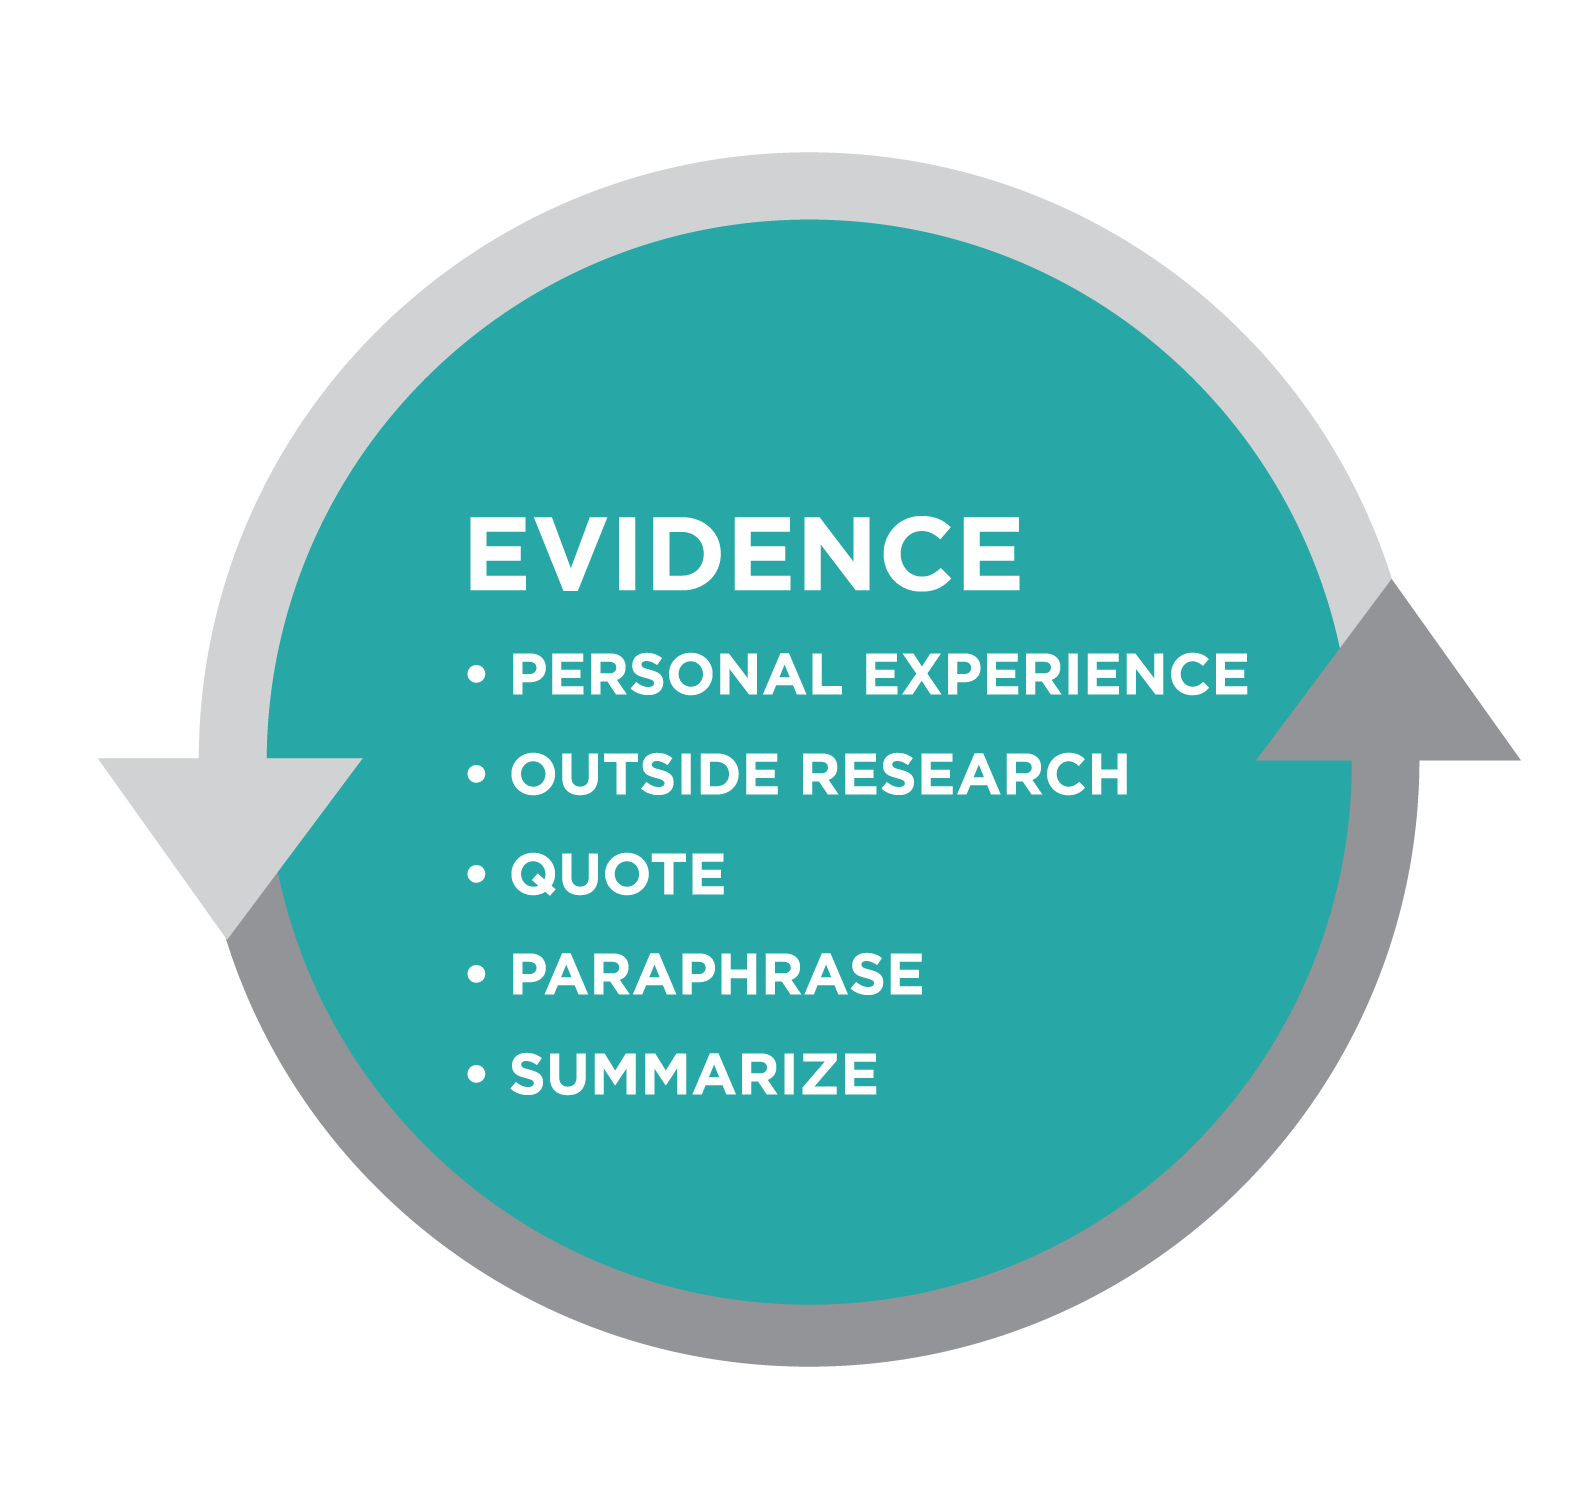 "Evidence" bullet list: Personal Experience, Outside Research, Quote, Paraphrase, Summarize.